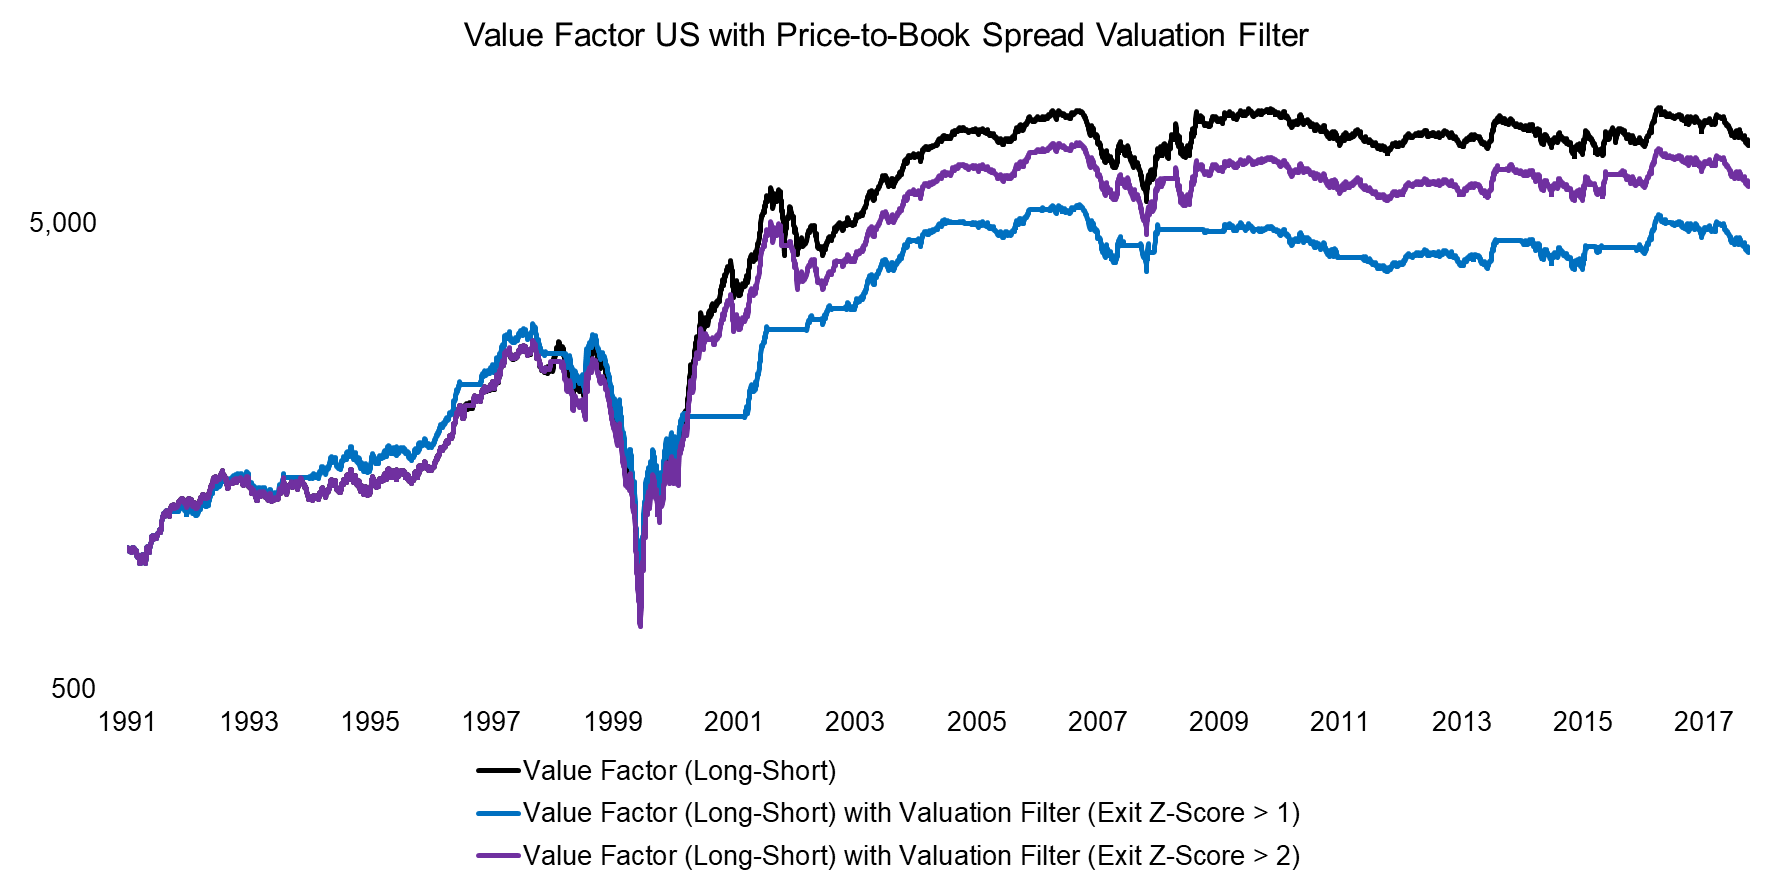 Value Factor US with Price-to-Book Spread Valuation Filter